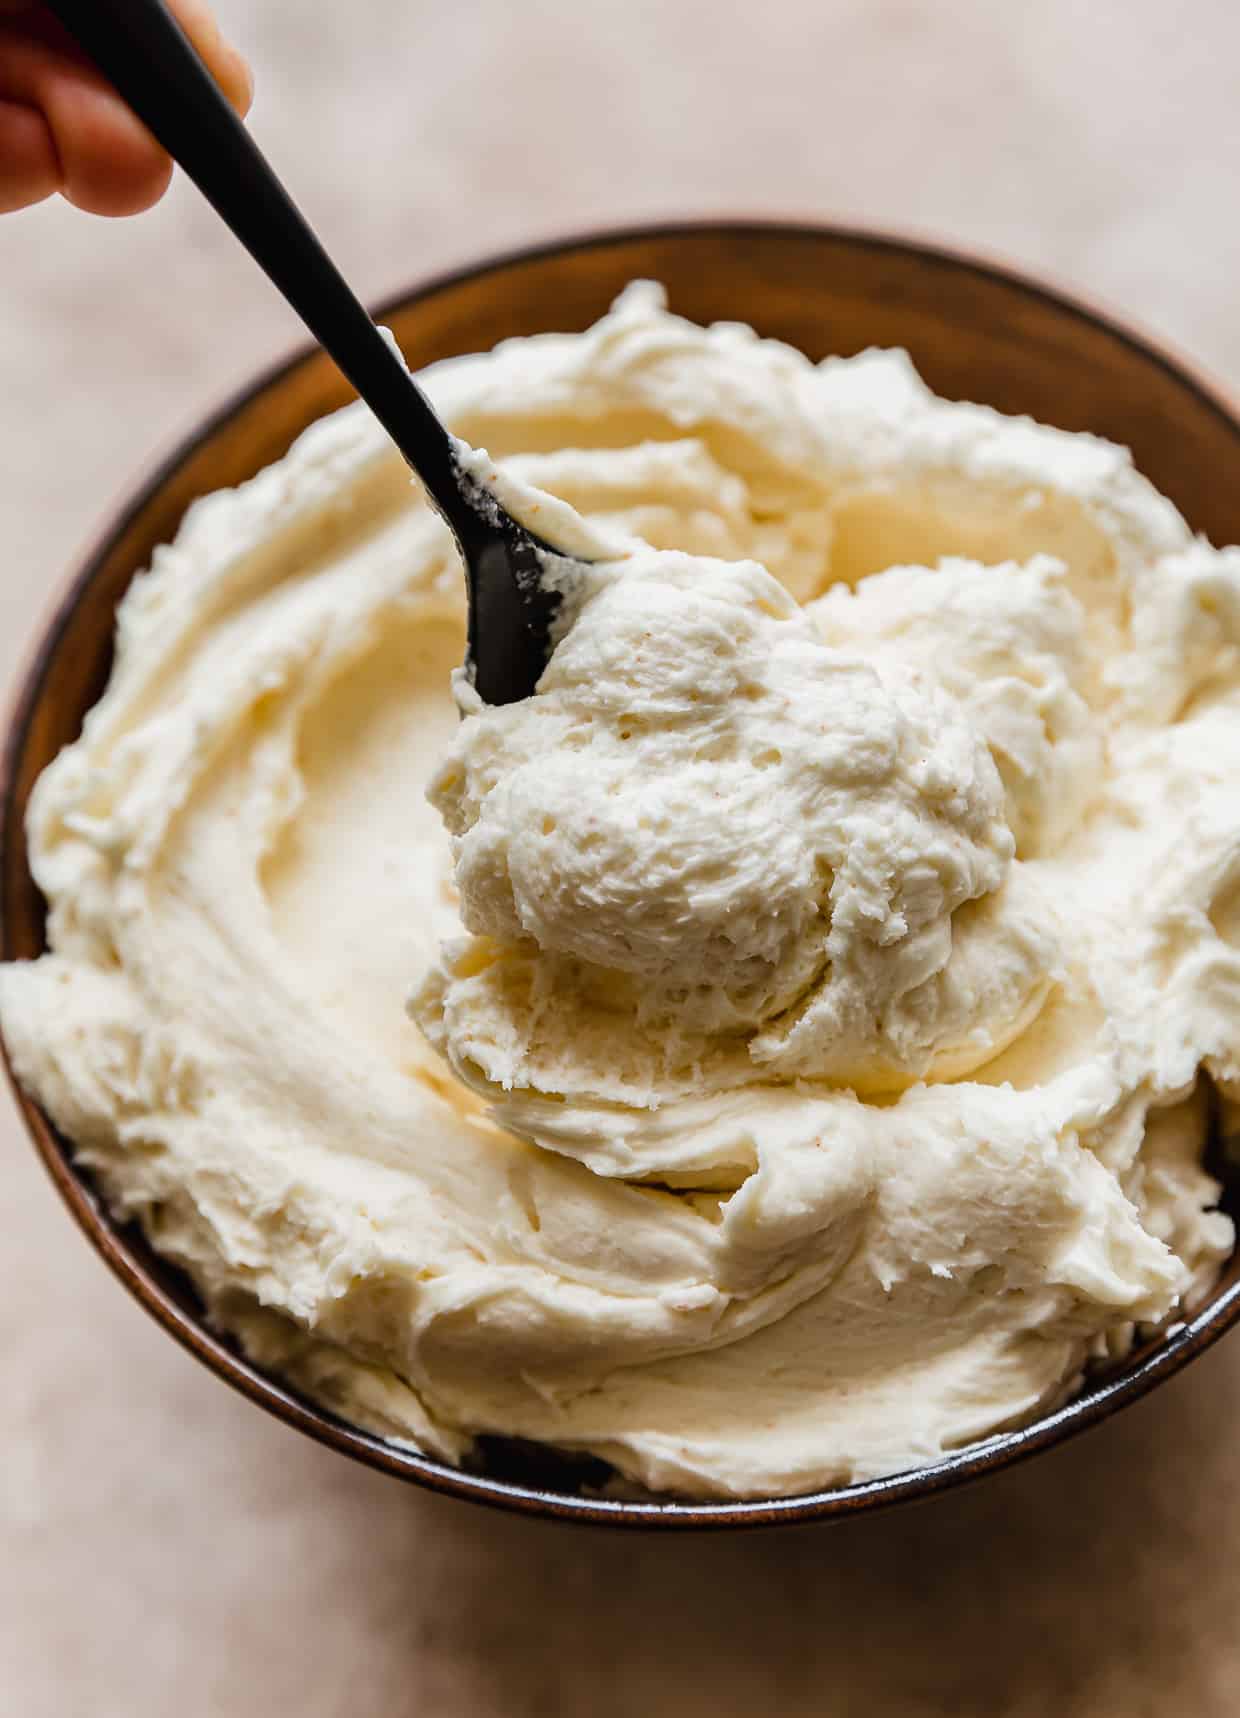 A spoon scooping brown butter frosting from a bowl filled with buttercream.